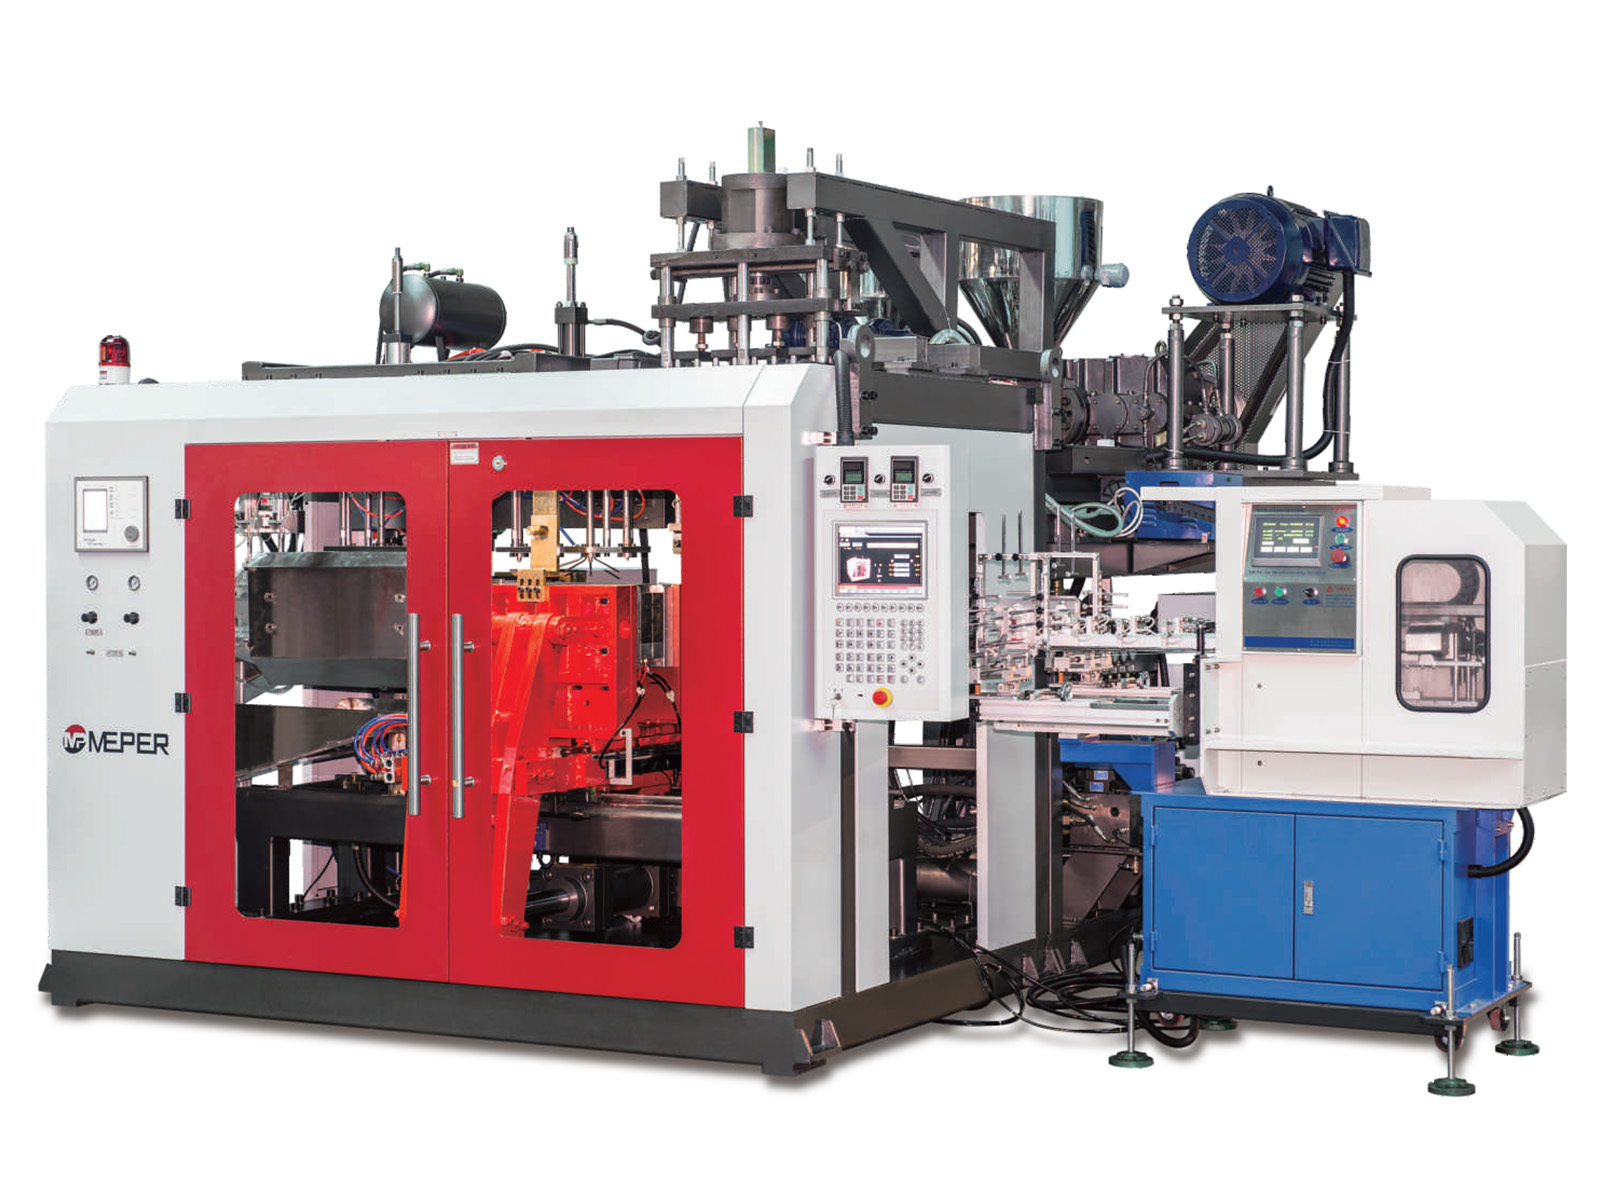 Operating rules for debugging of MEPER blow molding machine